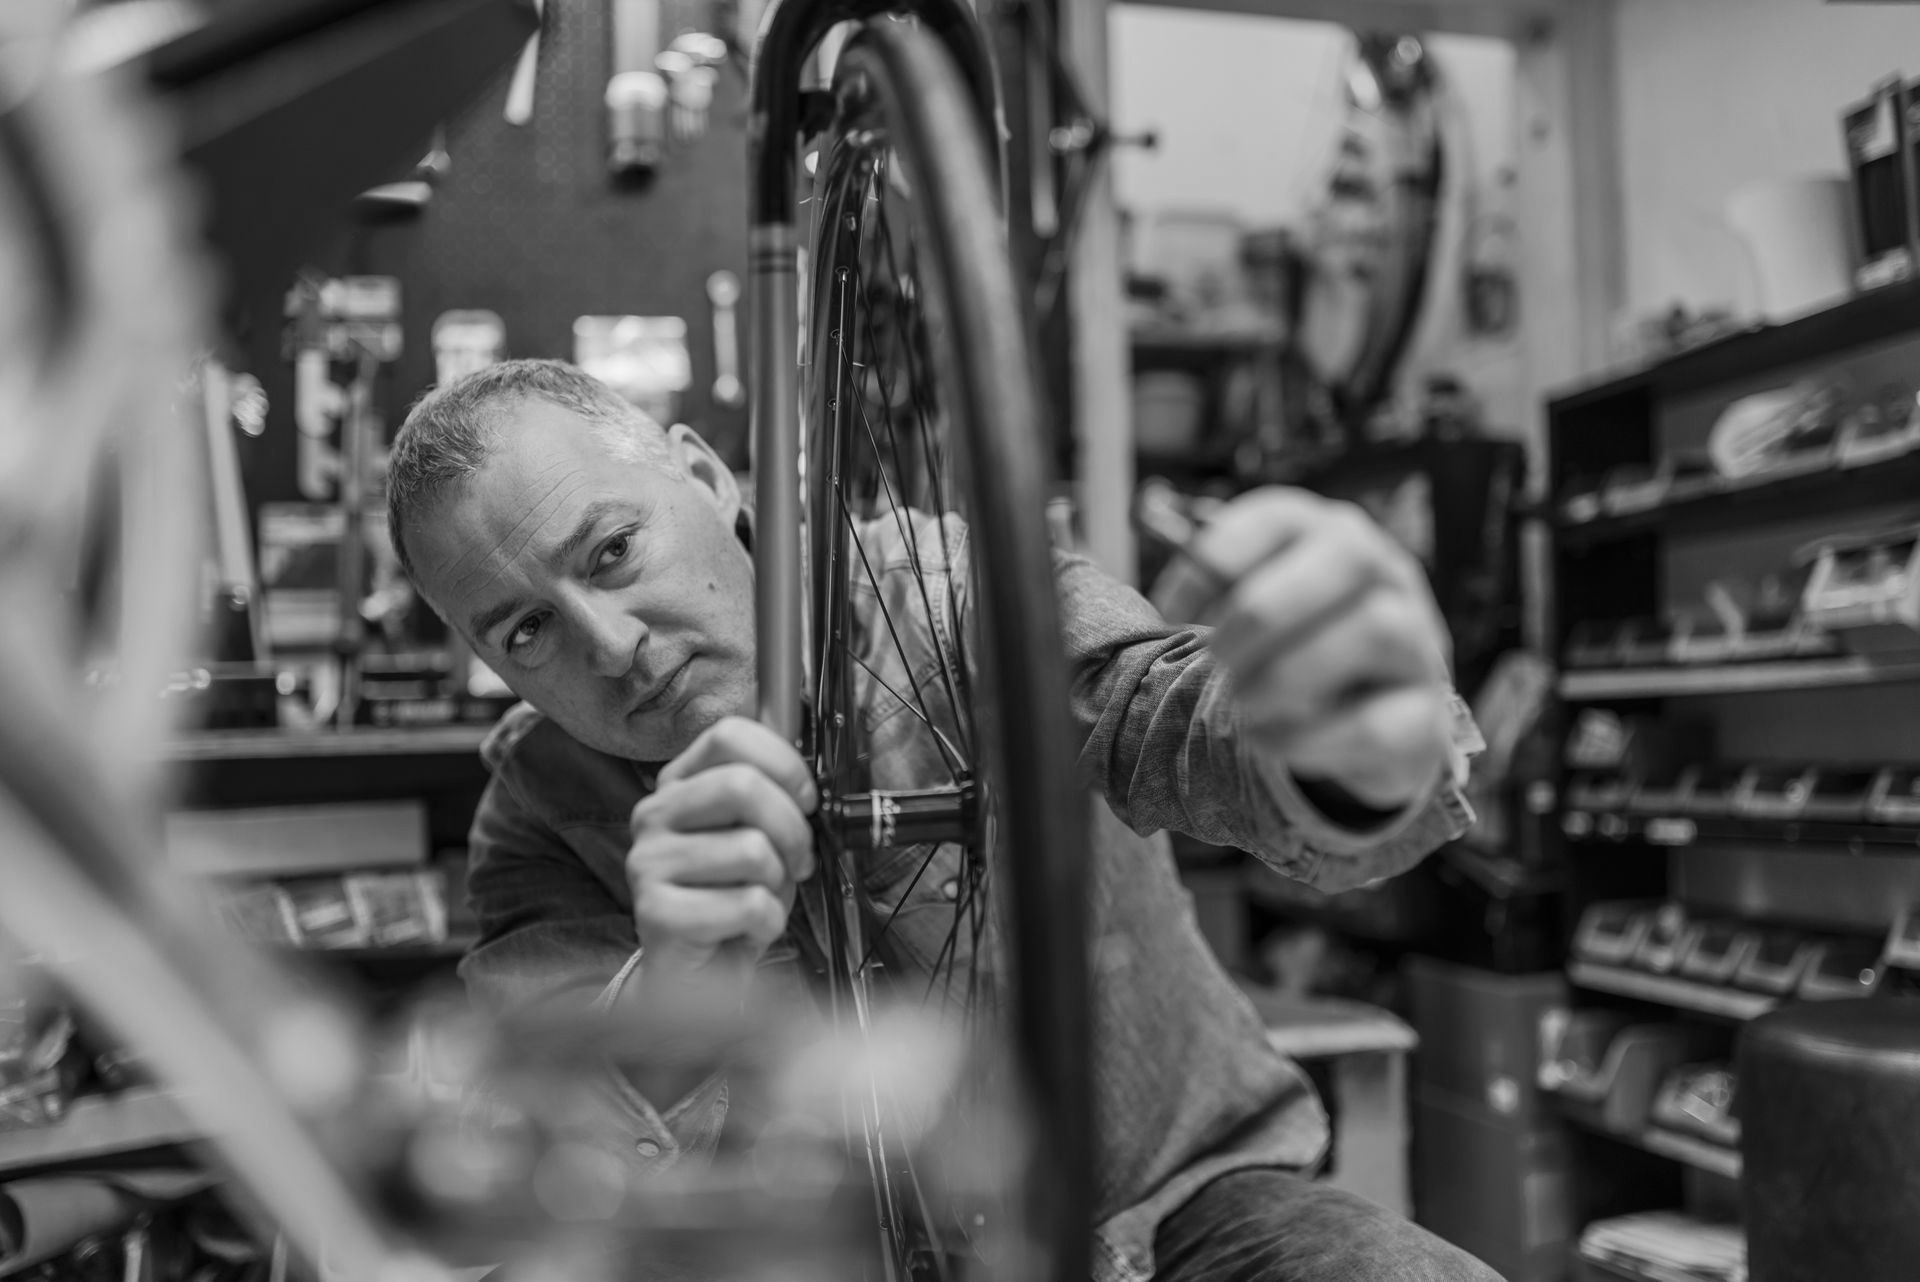 A bike shop owner repairing a bicycle, the owner needs small business tech support